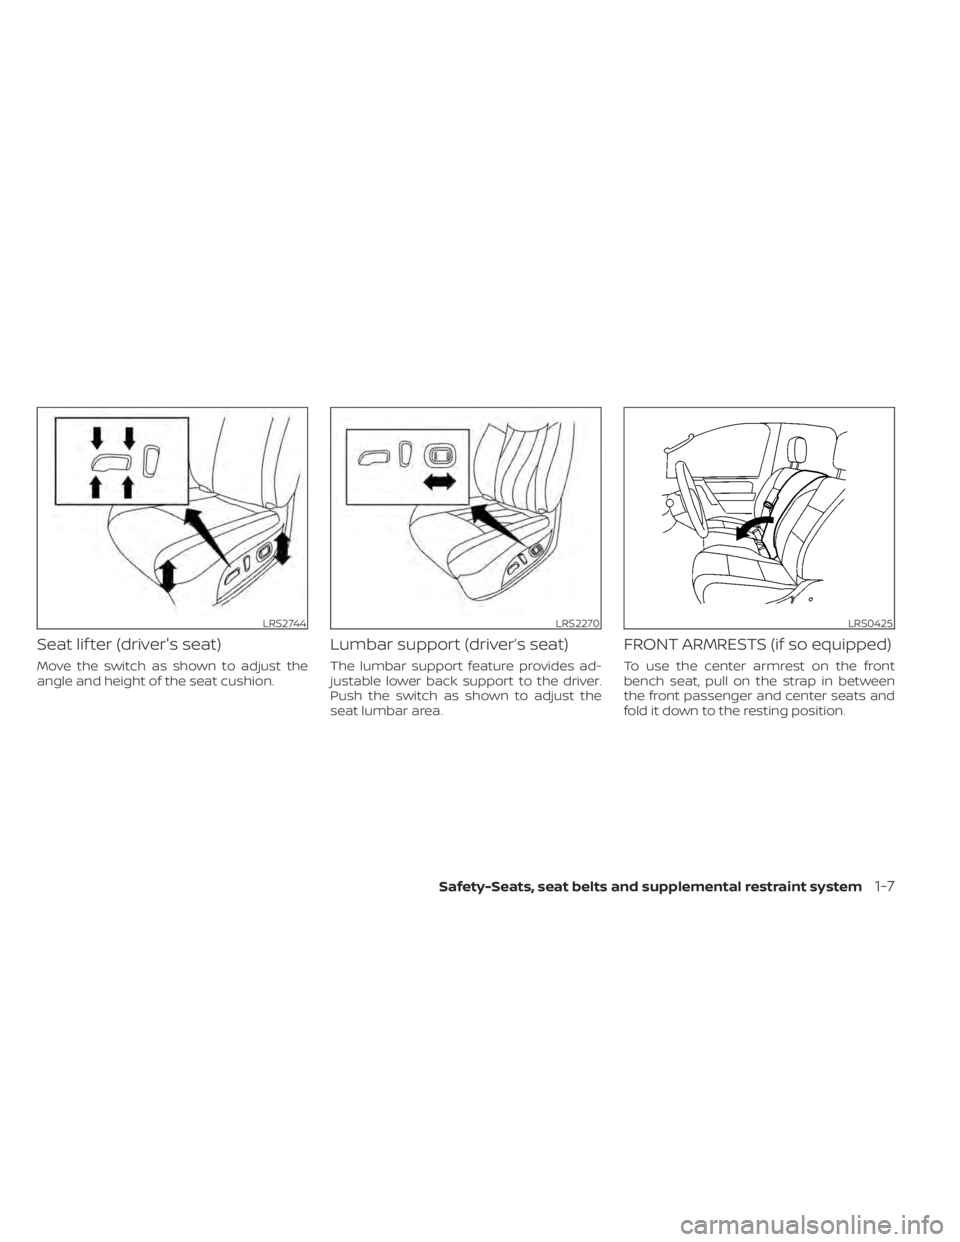 NISSAN TITAN 2021  Owner´s Manual Seat lif ter (driver's seat)
Move the switch as shown to adjust the
angle and height of the seat cushion.
Lumbar support (driver’s seat)
The lumbar support feature provides ad-
justable lower ba